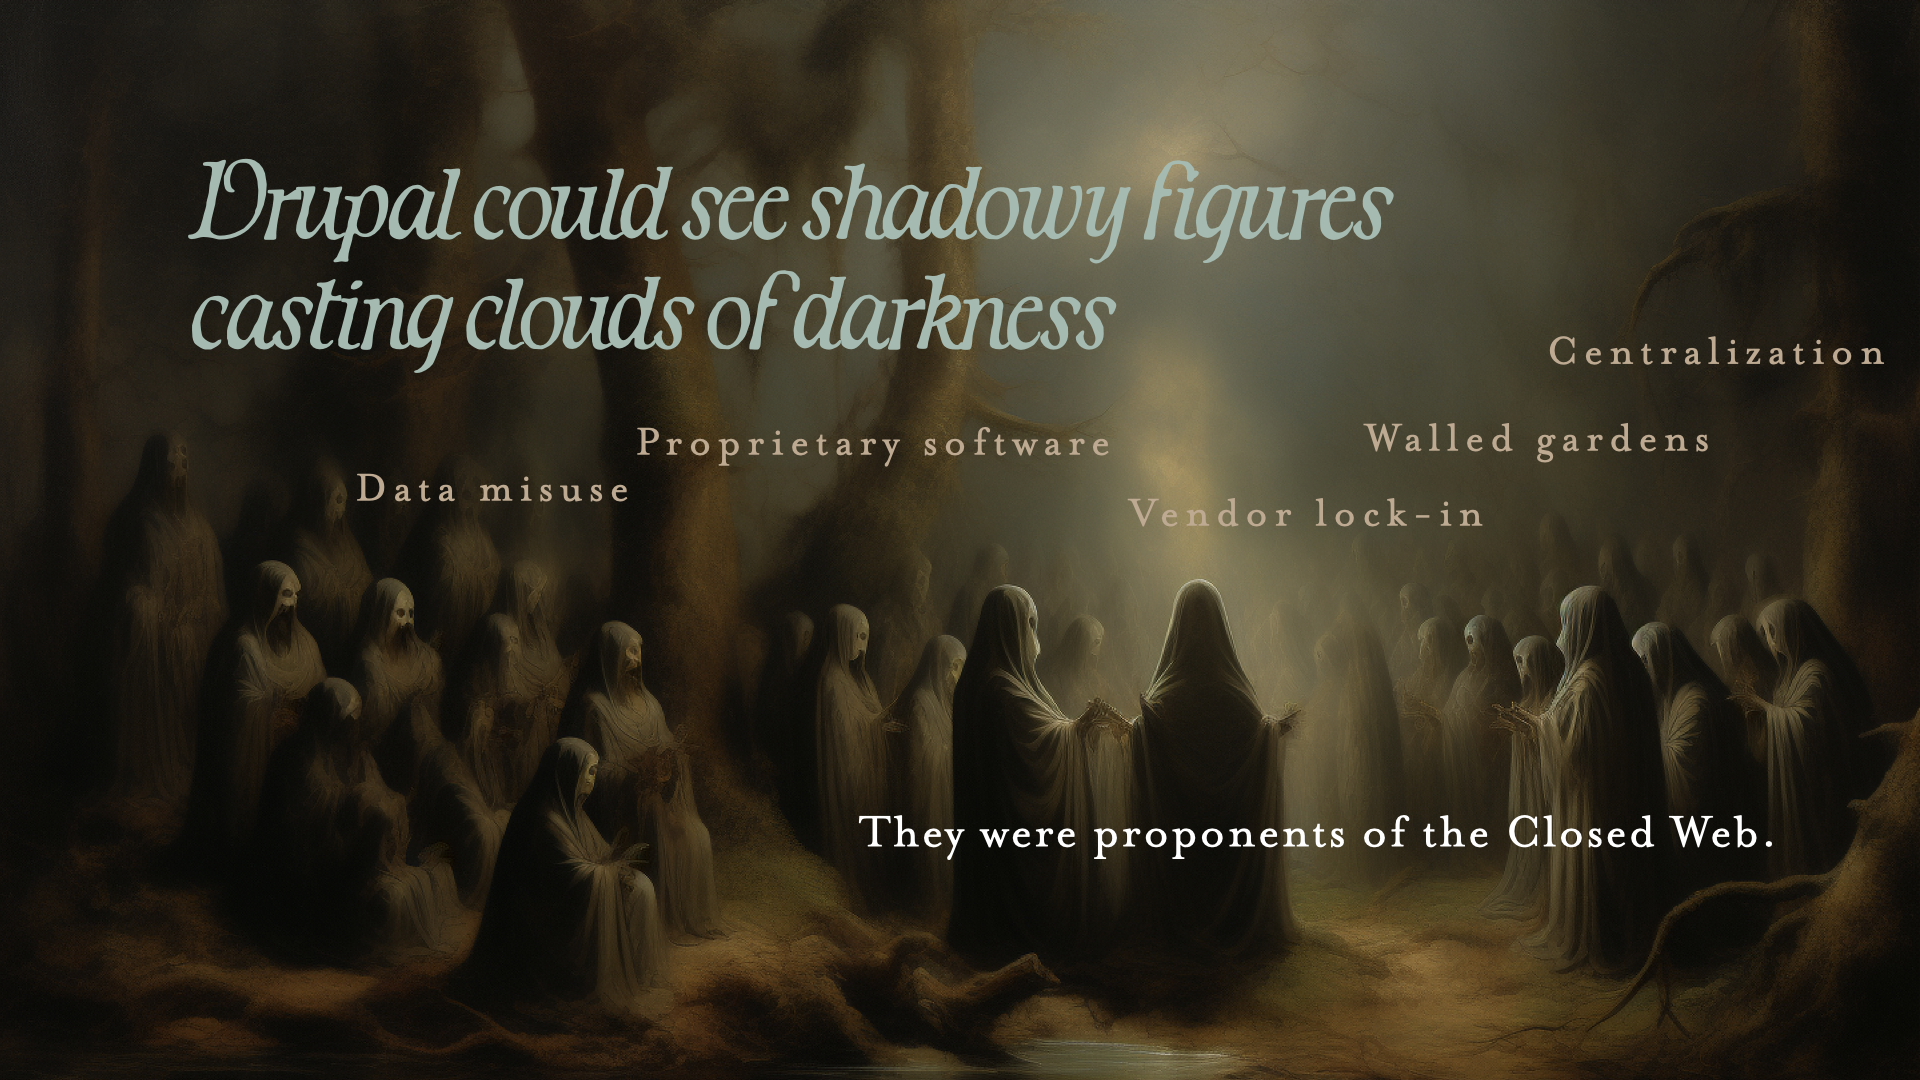 A dark illustration showing hooded figures casting dark clouds. The figures and clouds represent the negative aspects of a closed web, and are described with words such as 'vendor lock-in', 'centralization' and 'data misuse'.